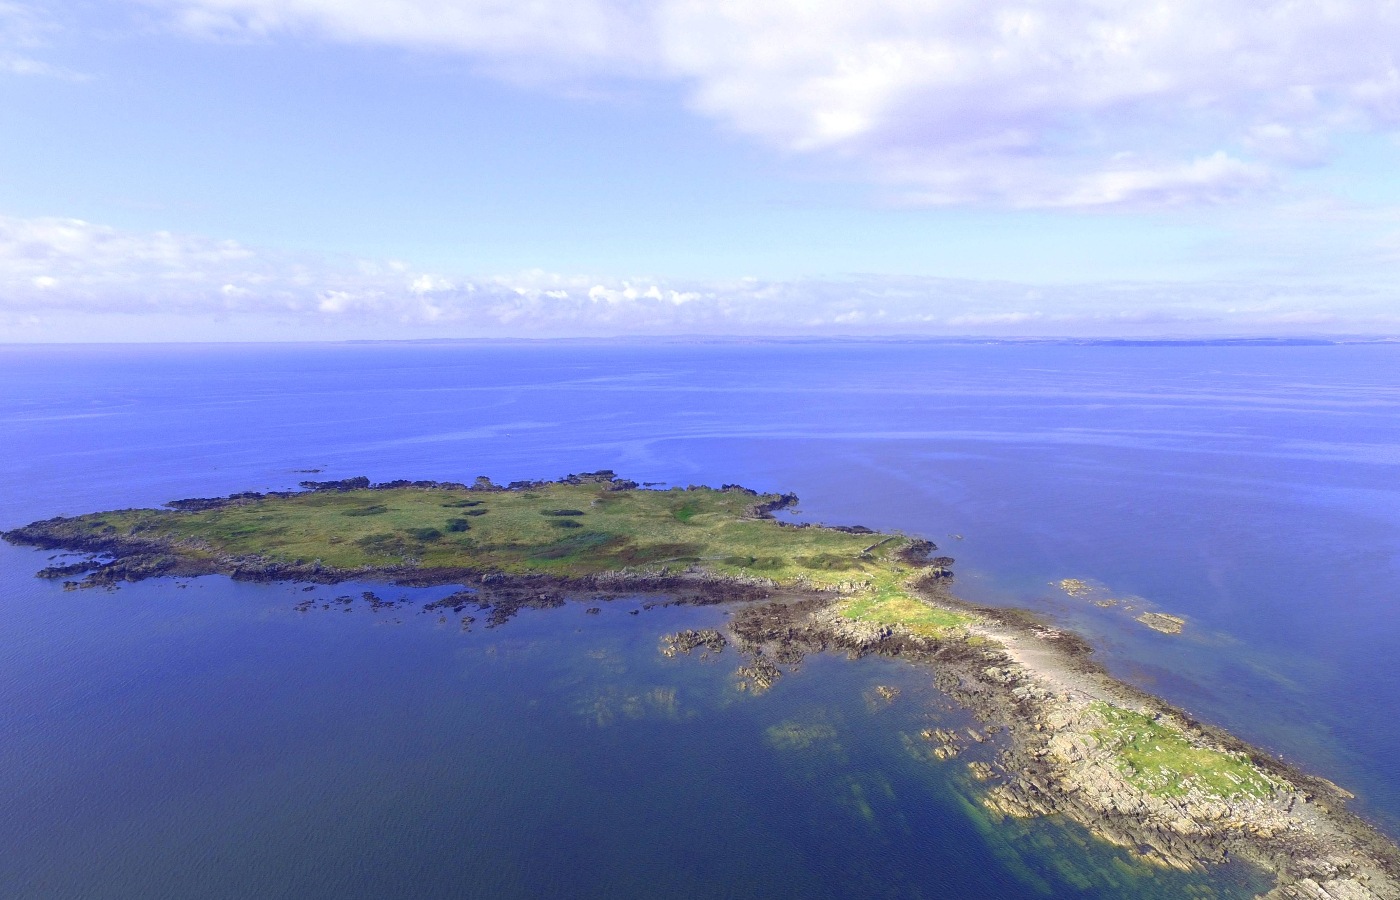 The island is on the market for offers over £150,000.